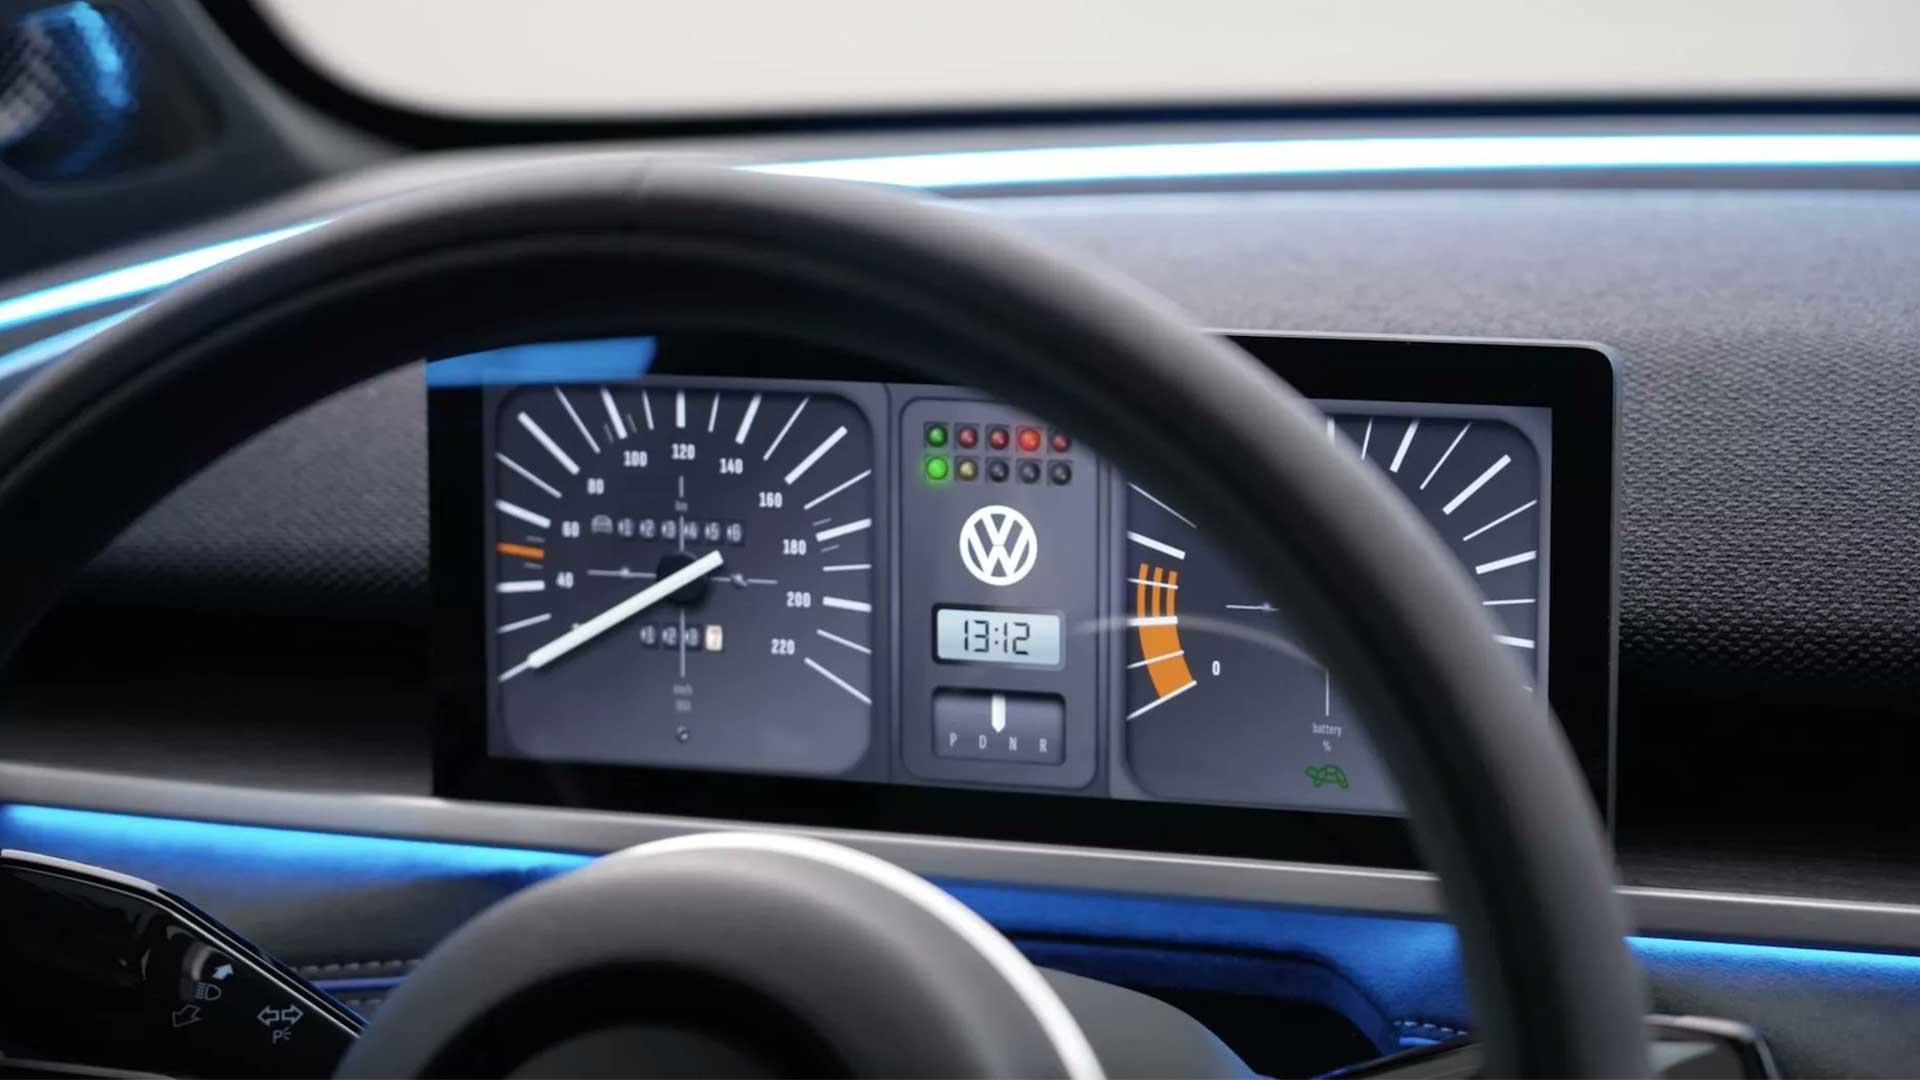 The new Volkswagen ID.2All has the counters of the Golf 1 or Beetle